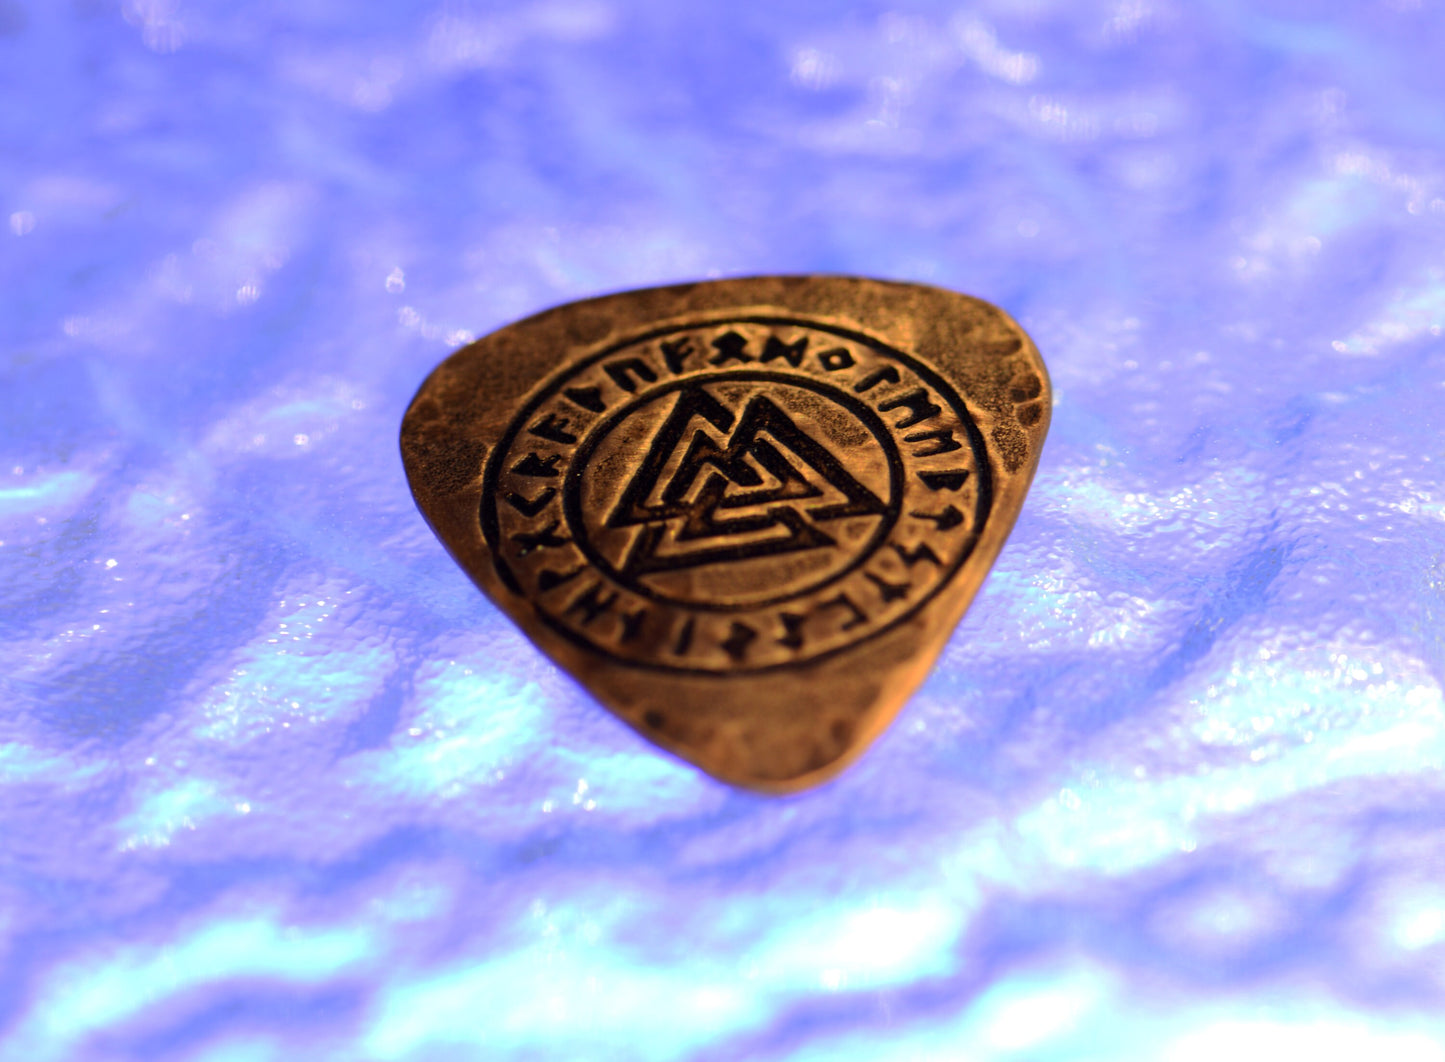 copper guitar pick - playable with the trifecta - signed guitar pick - NicisPicks